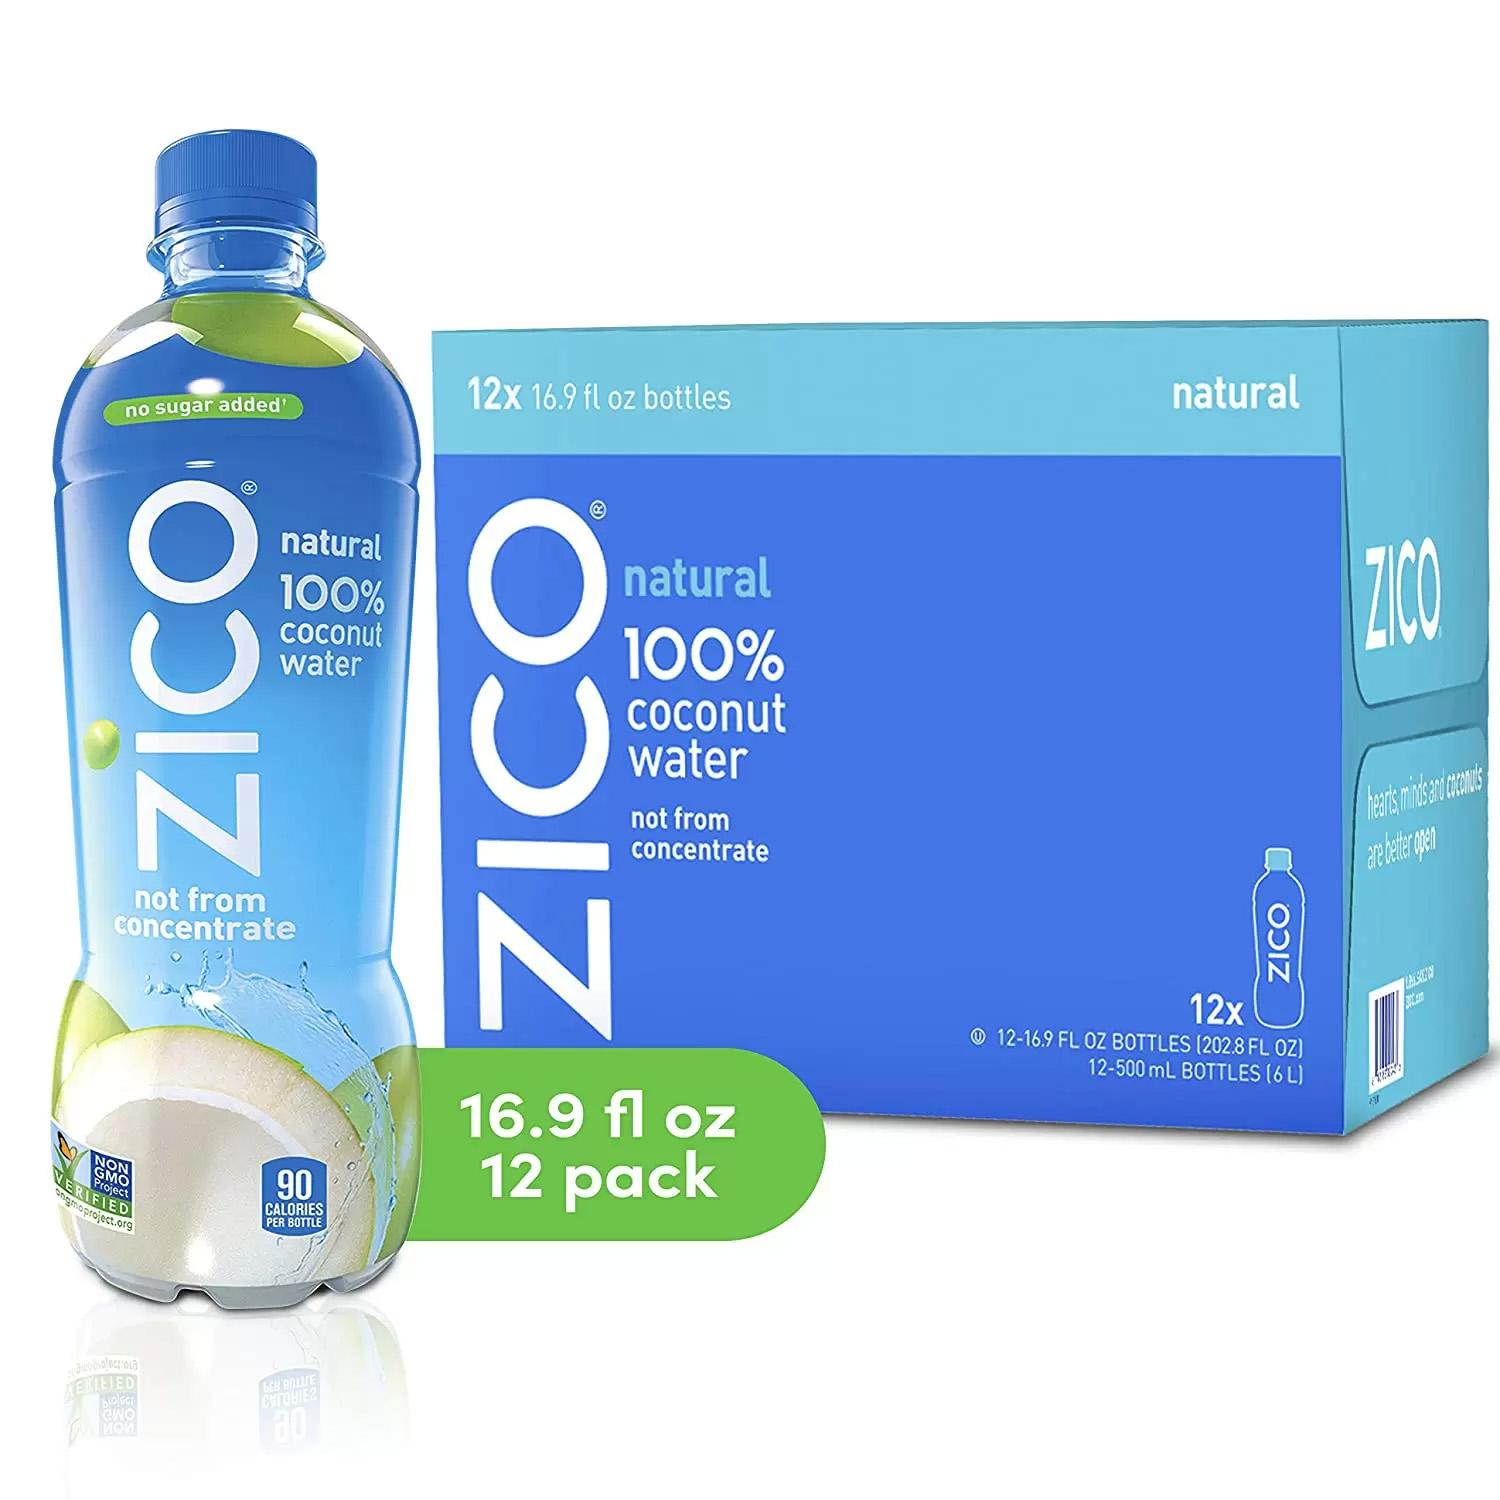 12 Zico Natural Coconut Water Drink for $12.30 Shipped